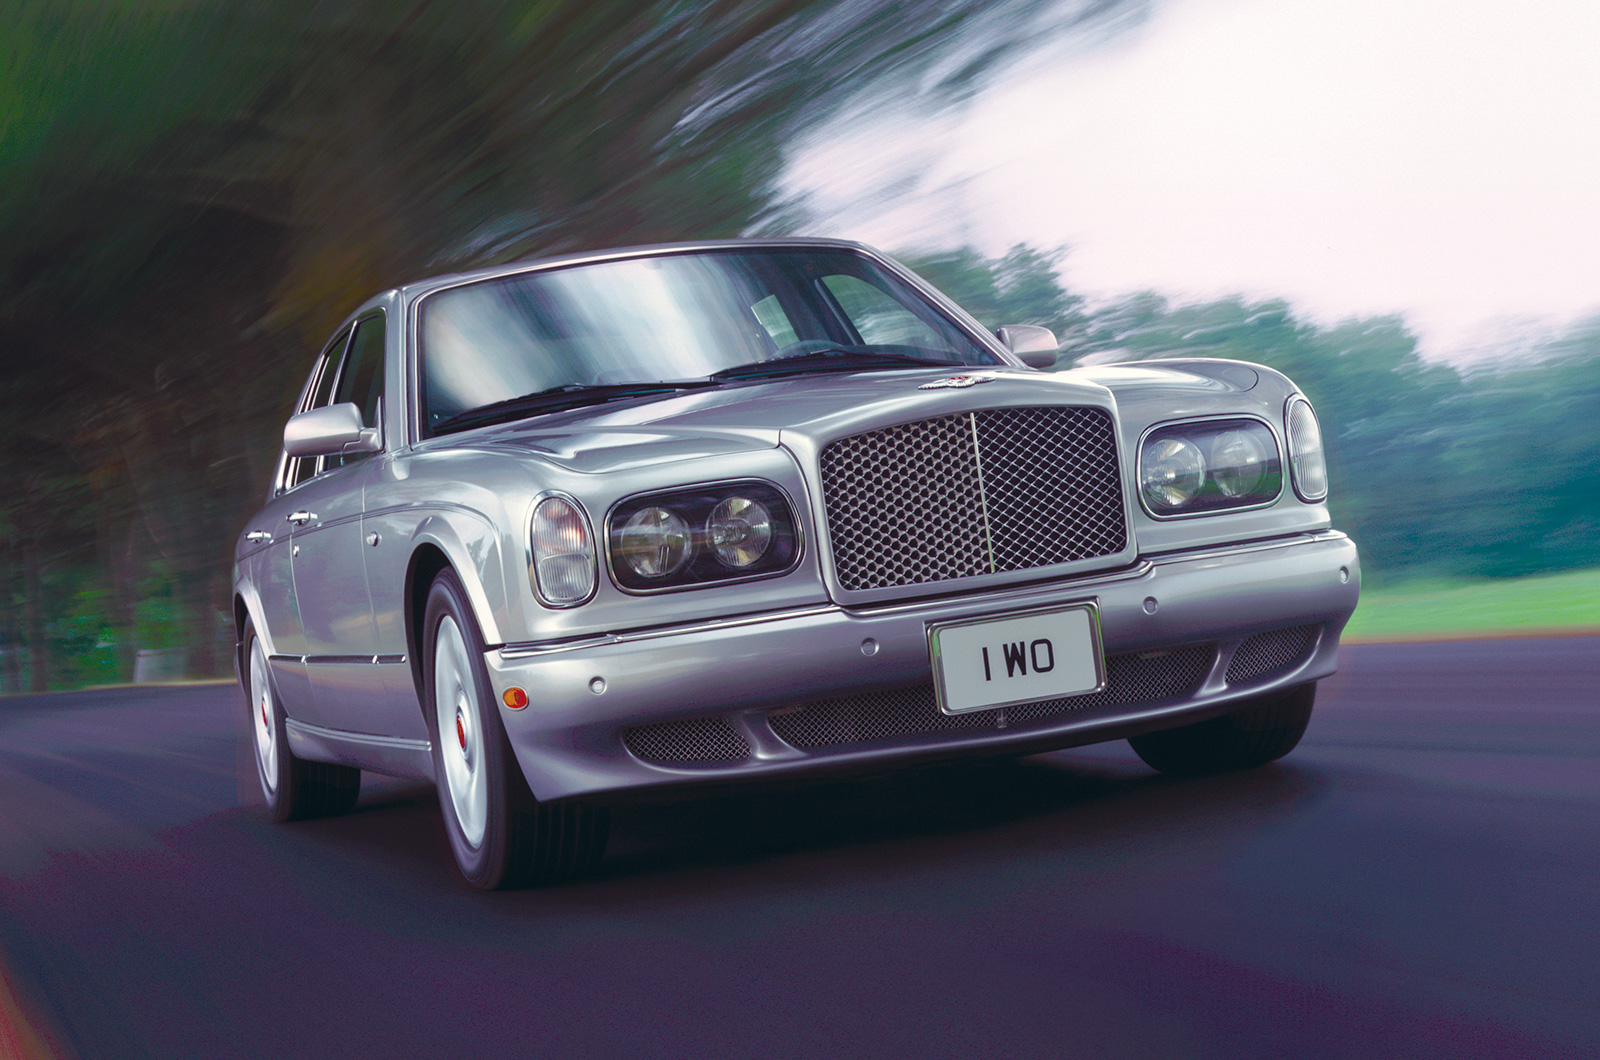 <p>Named after one of the sweeping turns at Le Mans, the heavyweight <strong>Arnage </strong>had immense presence and massive power from its twin-turbo BMW V8 engine. It wasn't long before the classic <strong>6.75-liter Rolls-Royce </strong>V8 was also offered in single-turbo form. When this powerplant was introduced the two editions became known as the <strong>Green Label </strong>(BMW engine) and the <strong>Red Label </strong>(Bentley powerplant).</p>